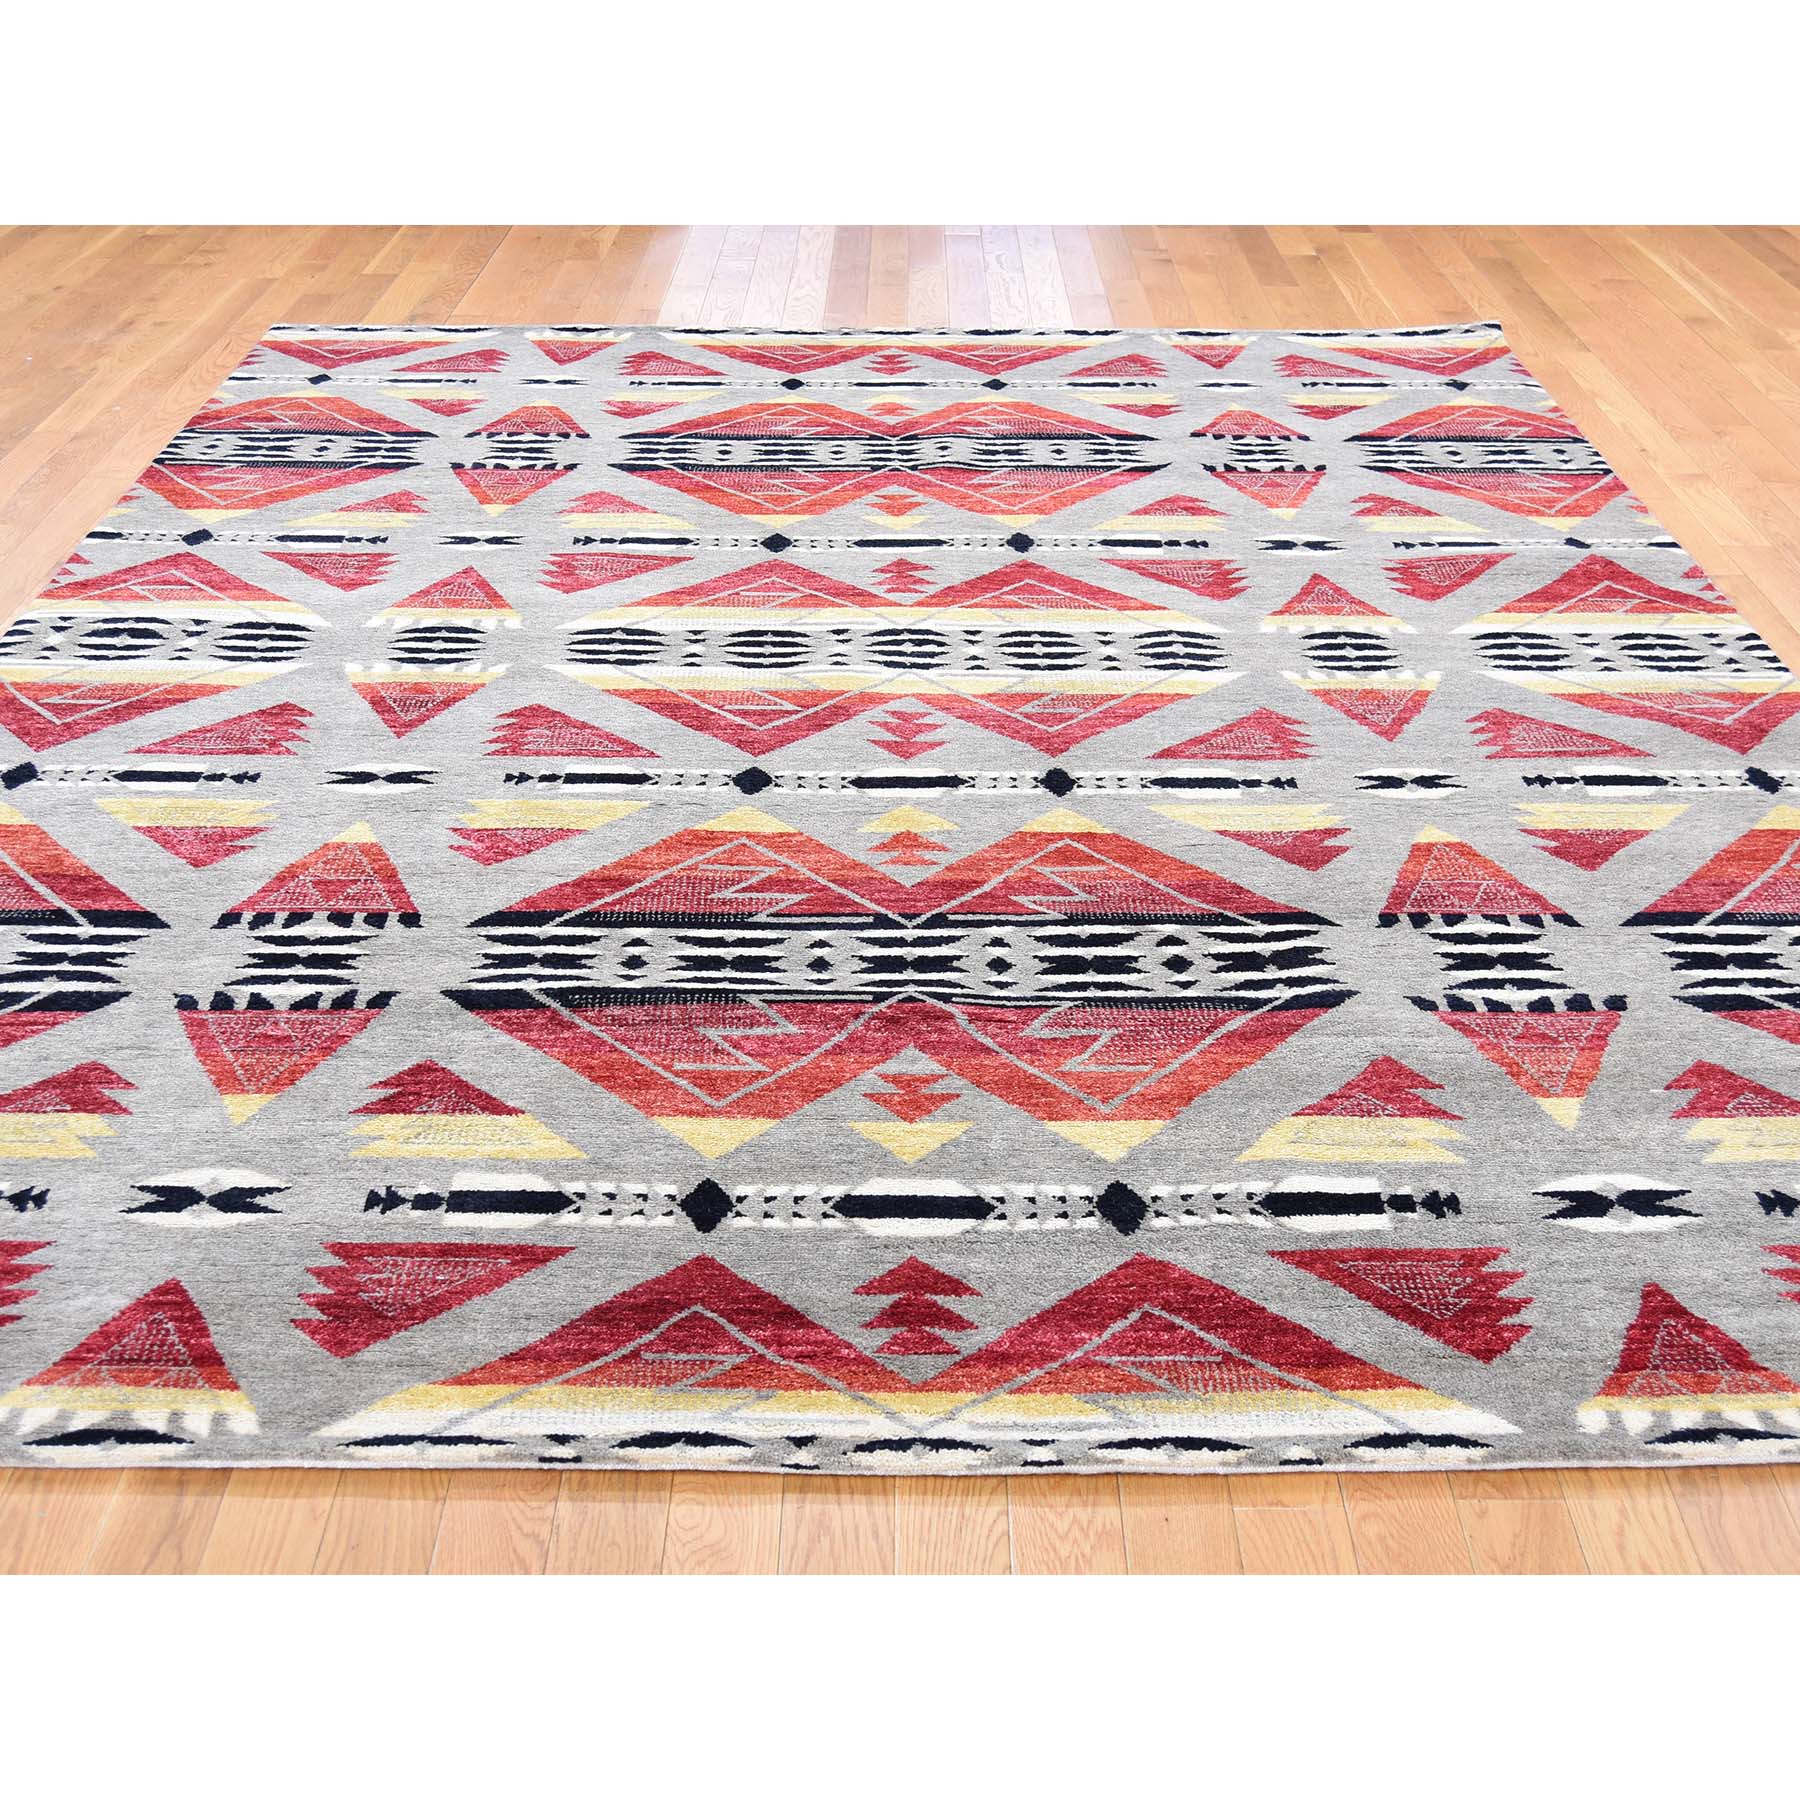 7-10 x9-9  Hand Knotted Southwestern Design Pure Wool Oriental Rug 